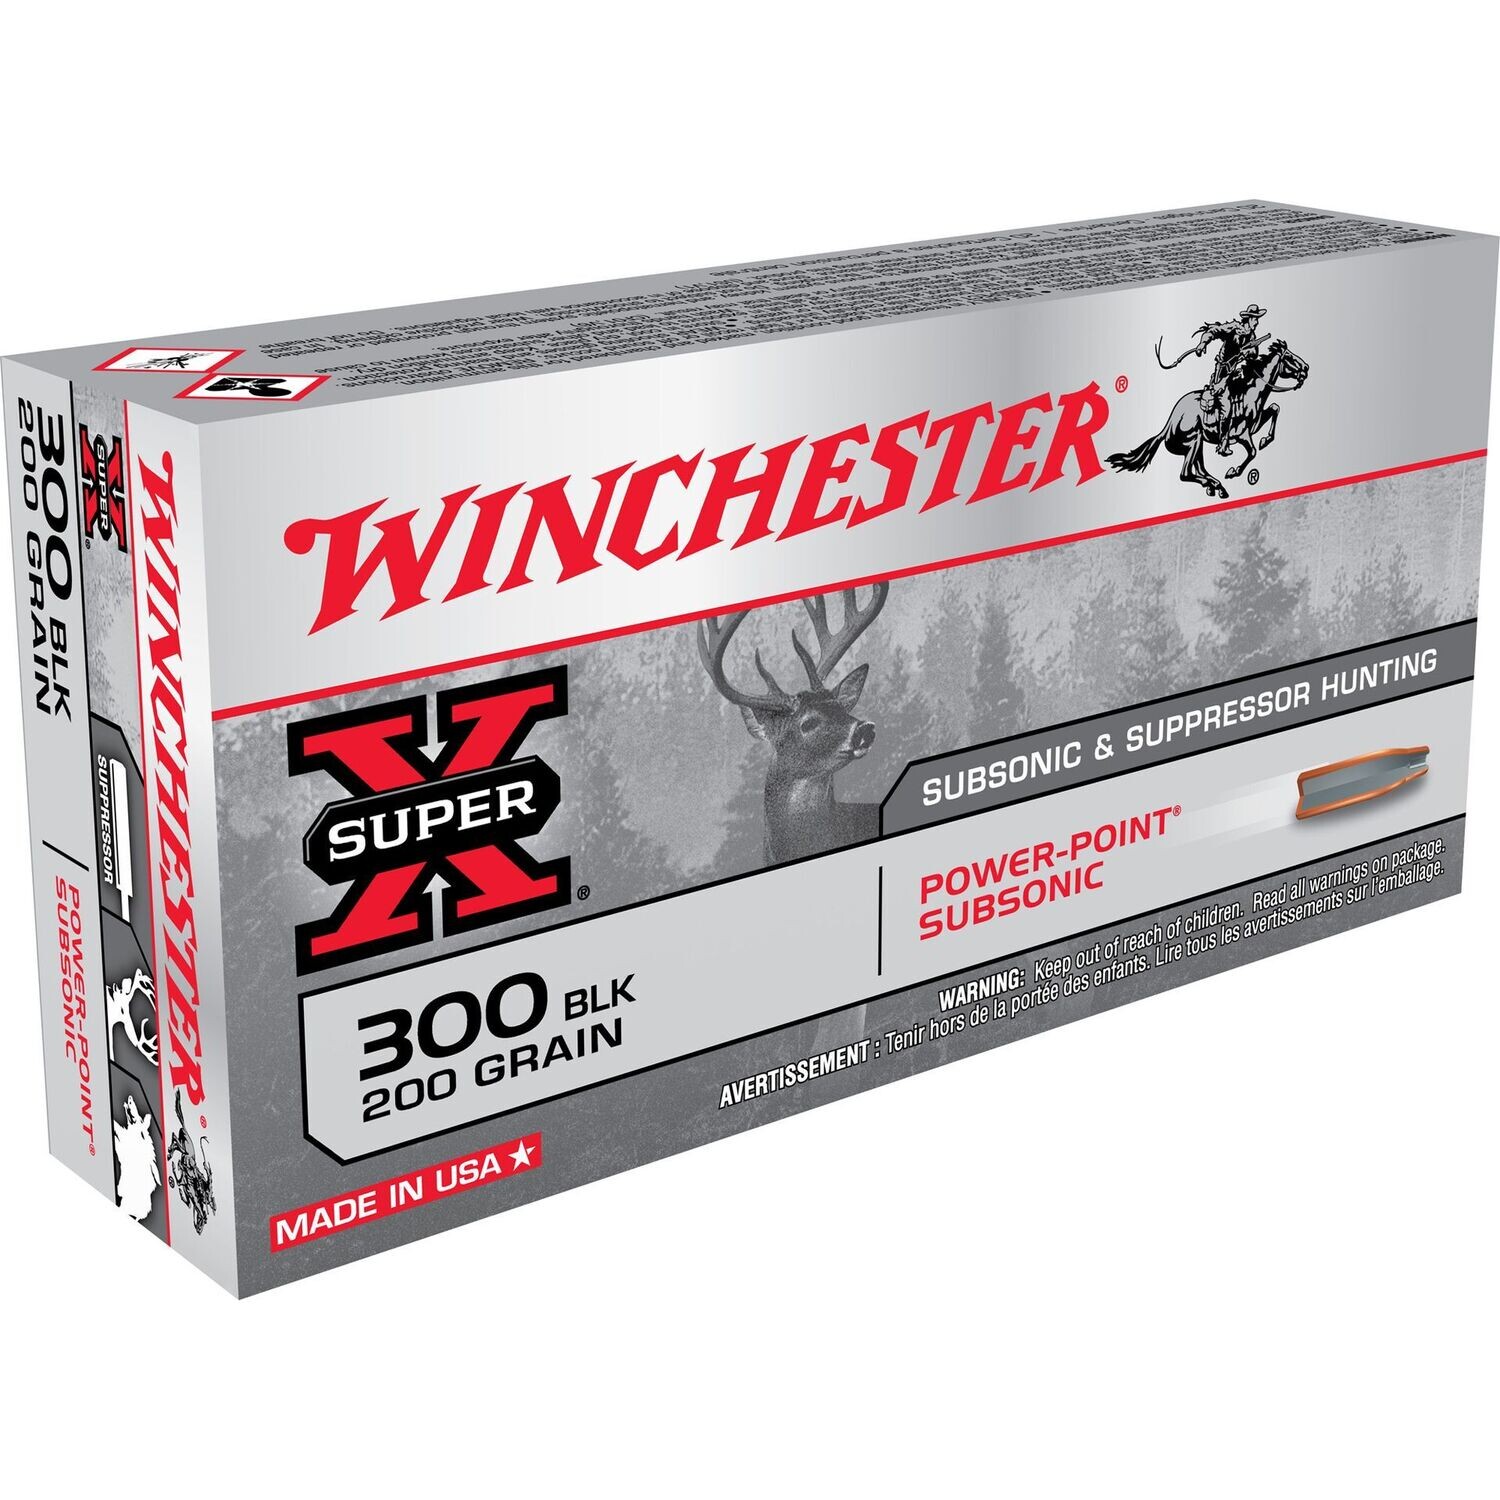 WINCHESTER PWR PNT 300BLK 200GR SS 20/200